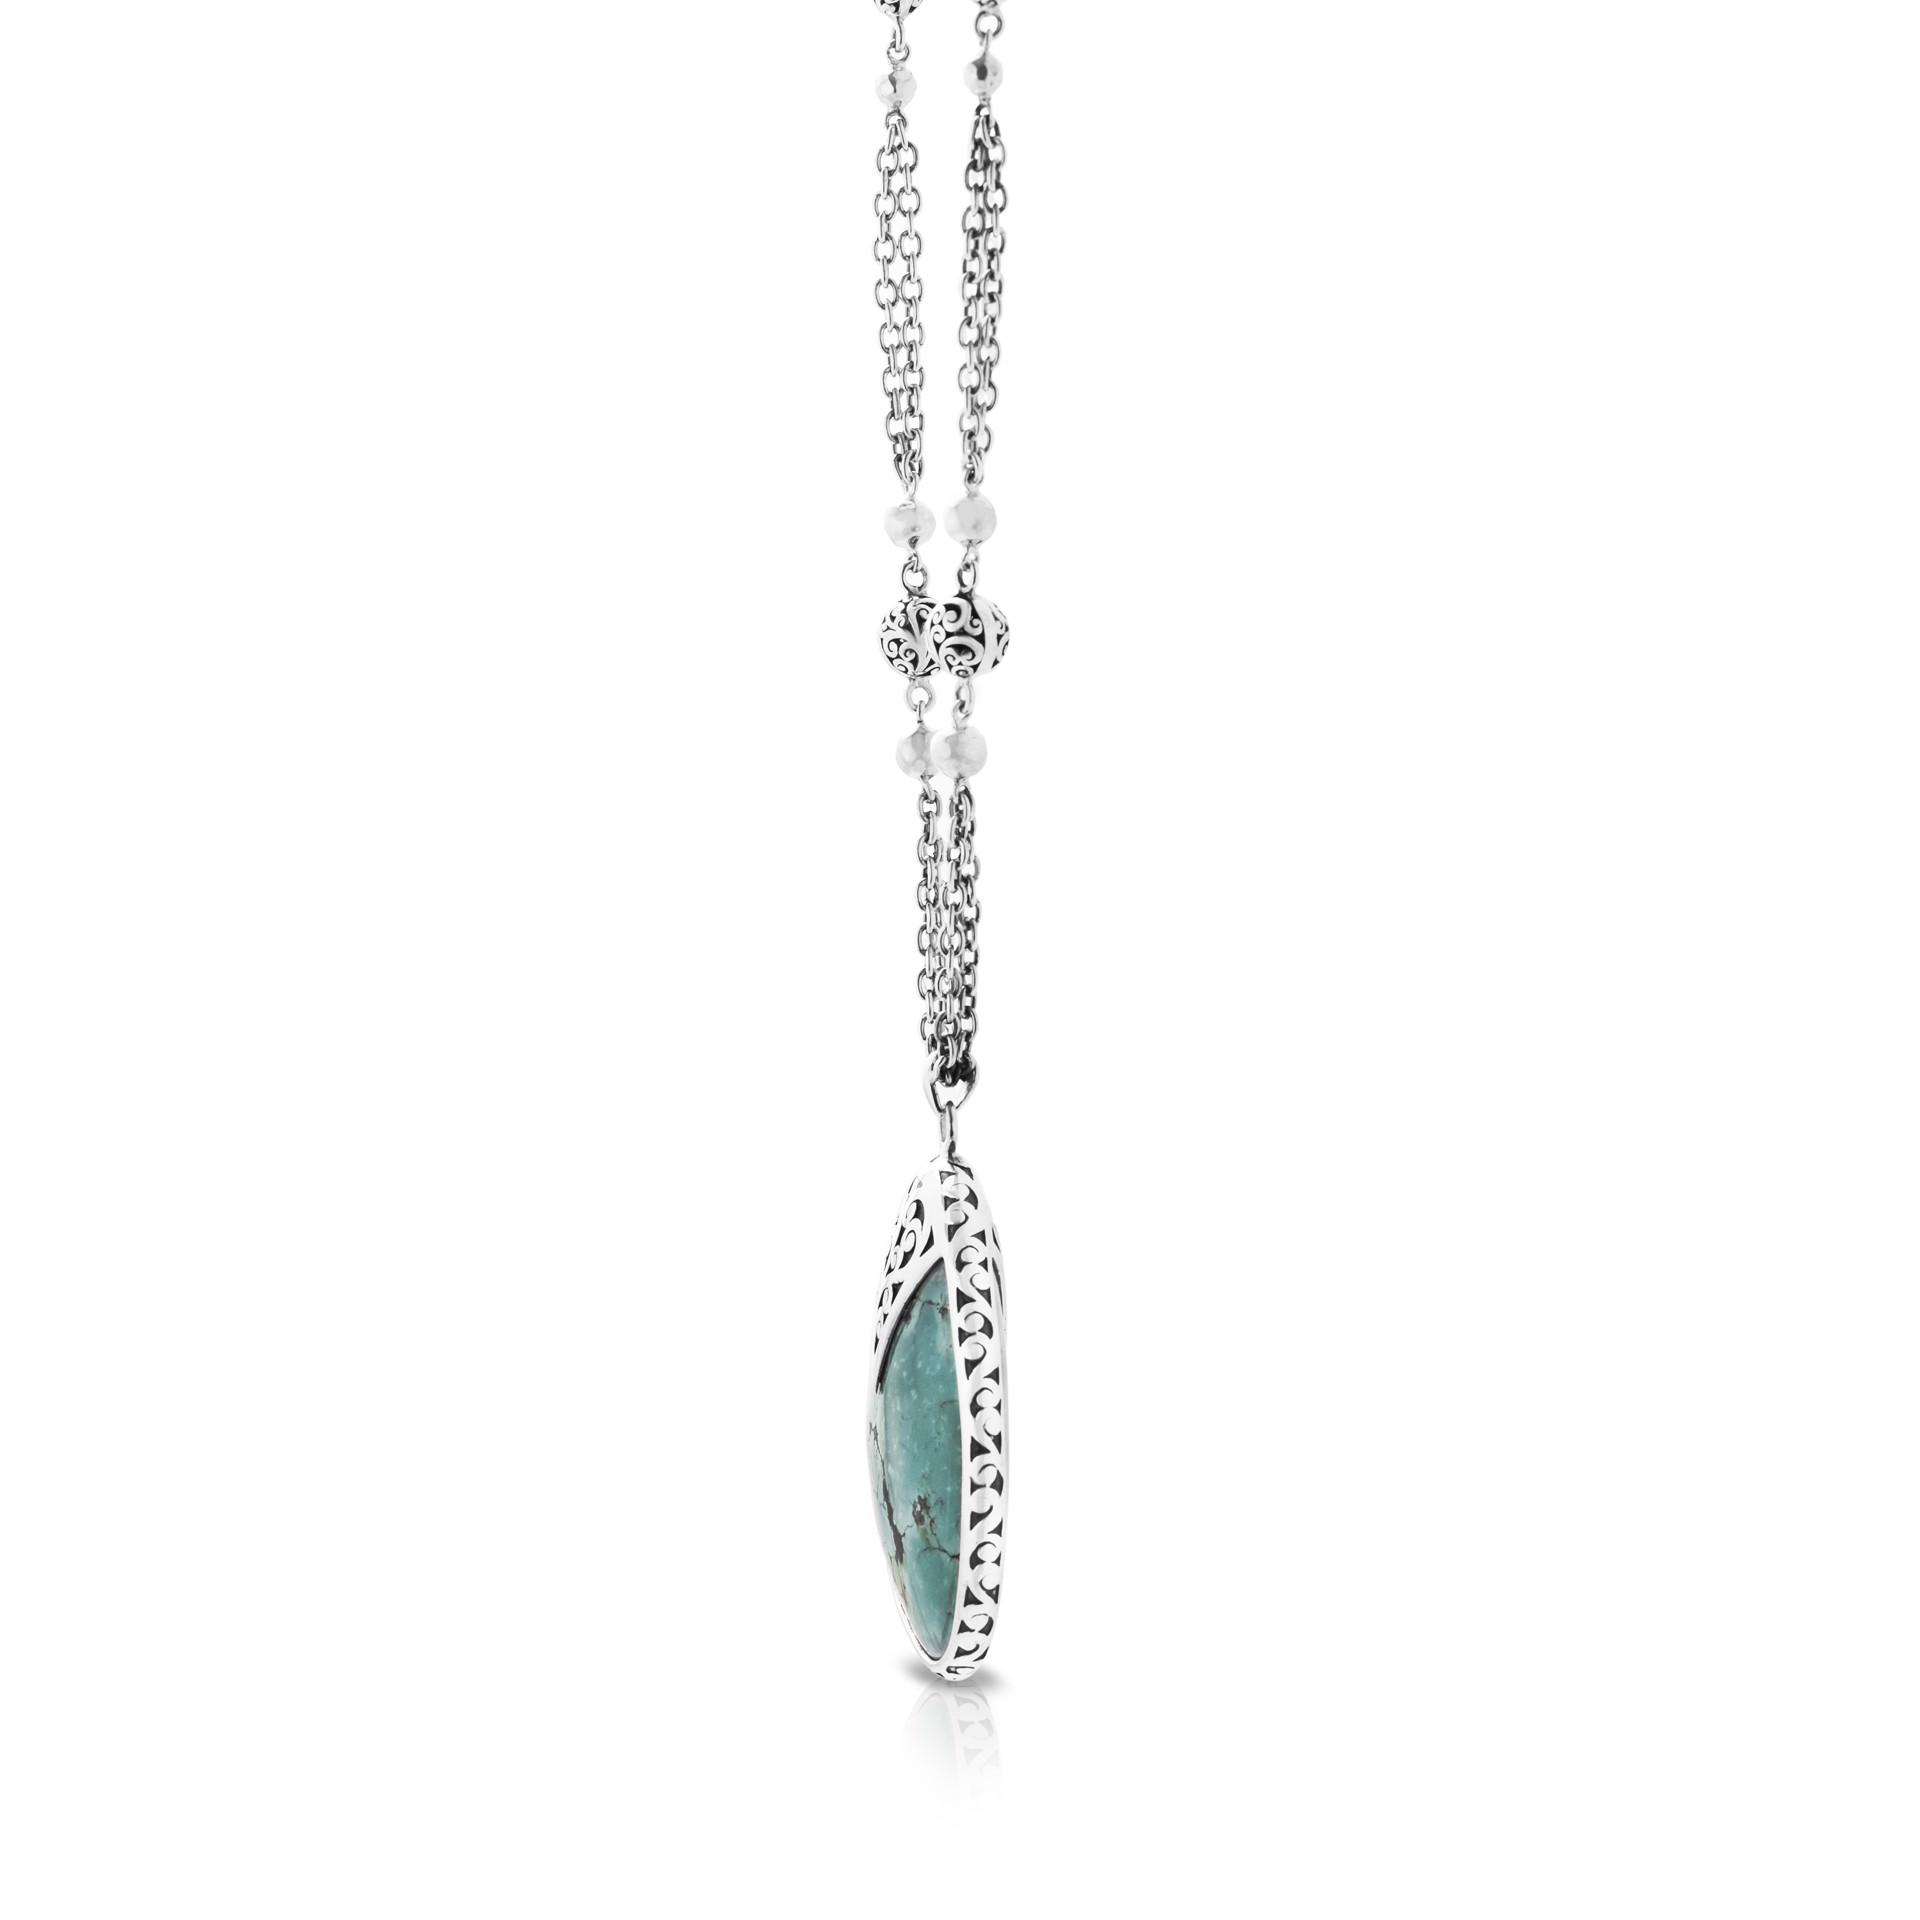 9710 Organic Shaped Turquoise with Hand Carved Scroll Rim on Handmade Sterling Silver Chain, Pendant is 36 by 44mm by Lois Hill